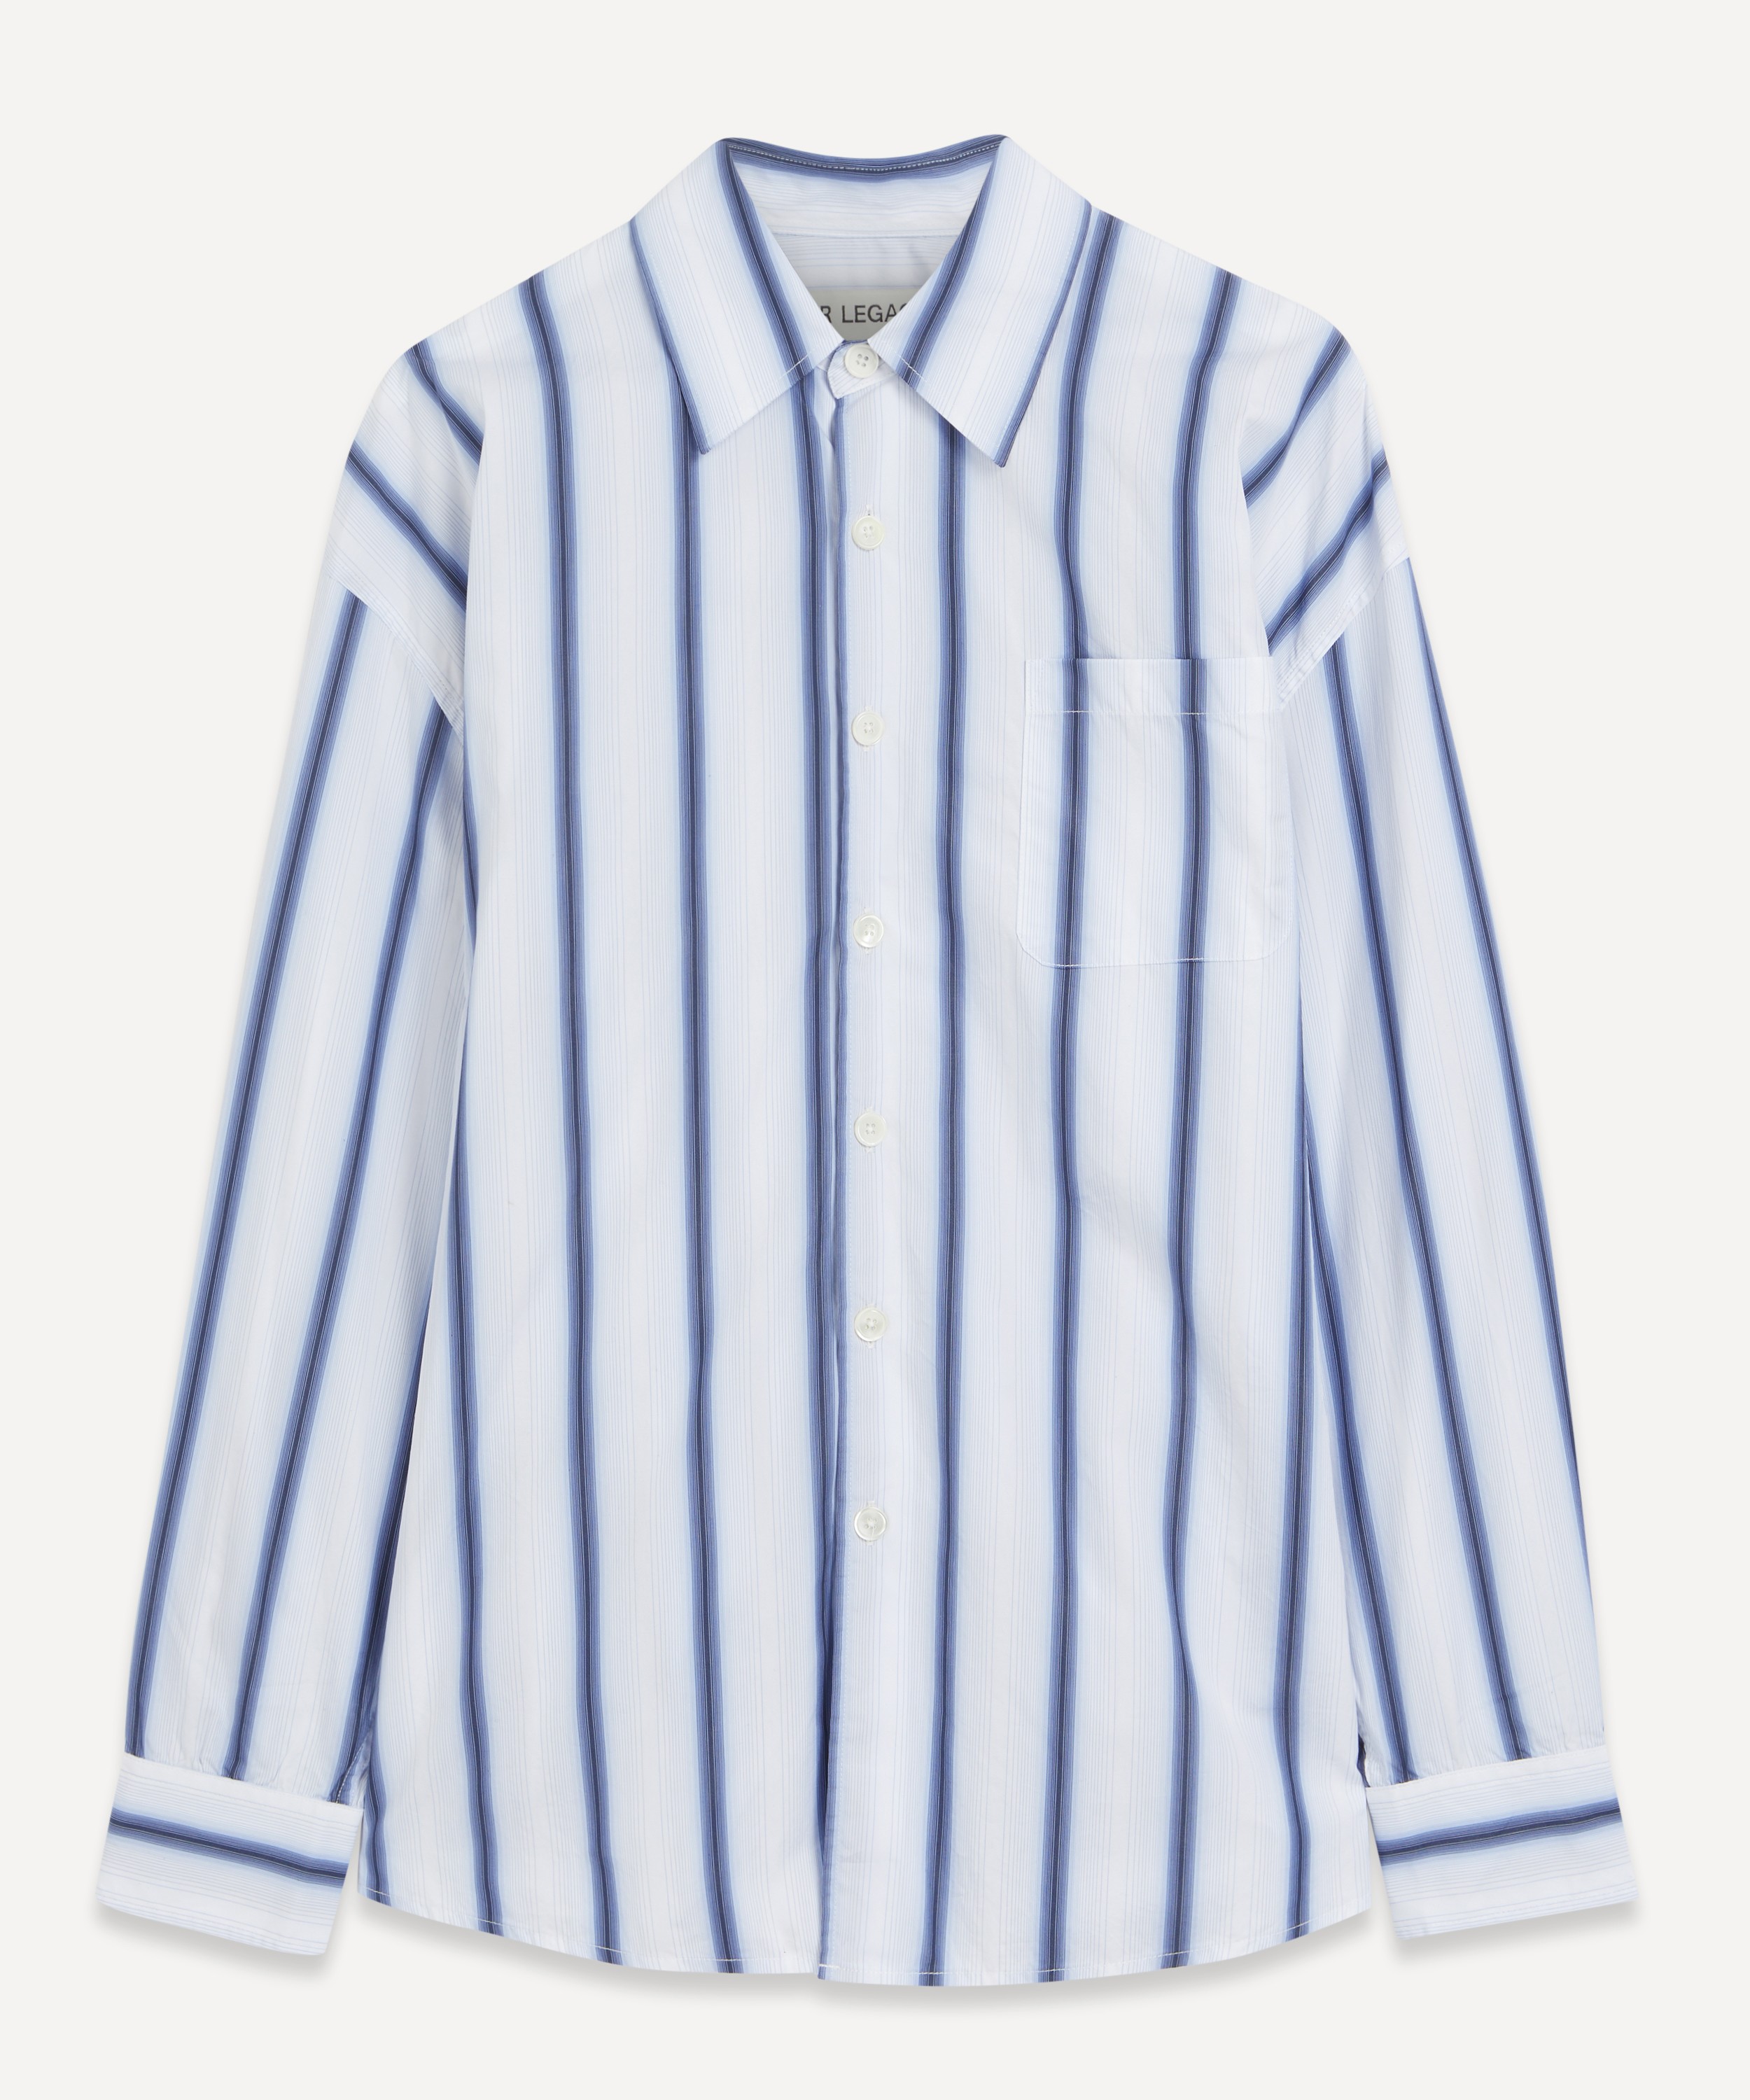 Our Legacy - Borrowed Shirt in Blue Crypto Stripe